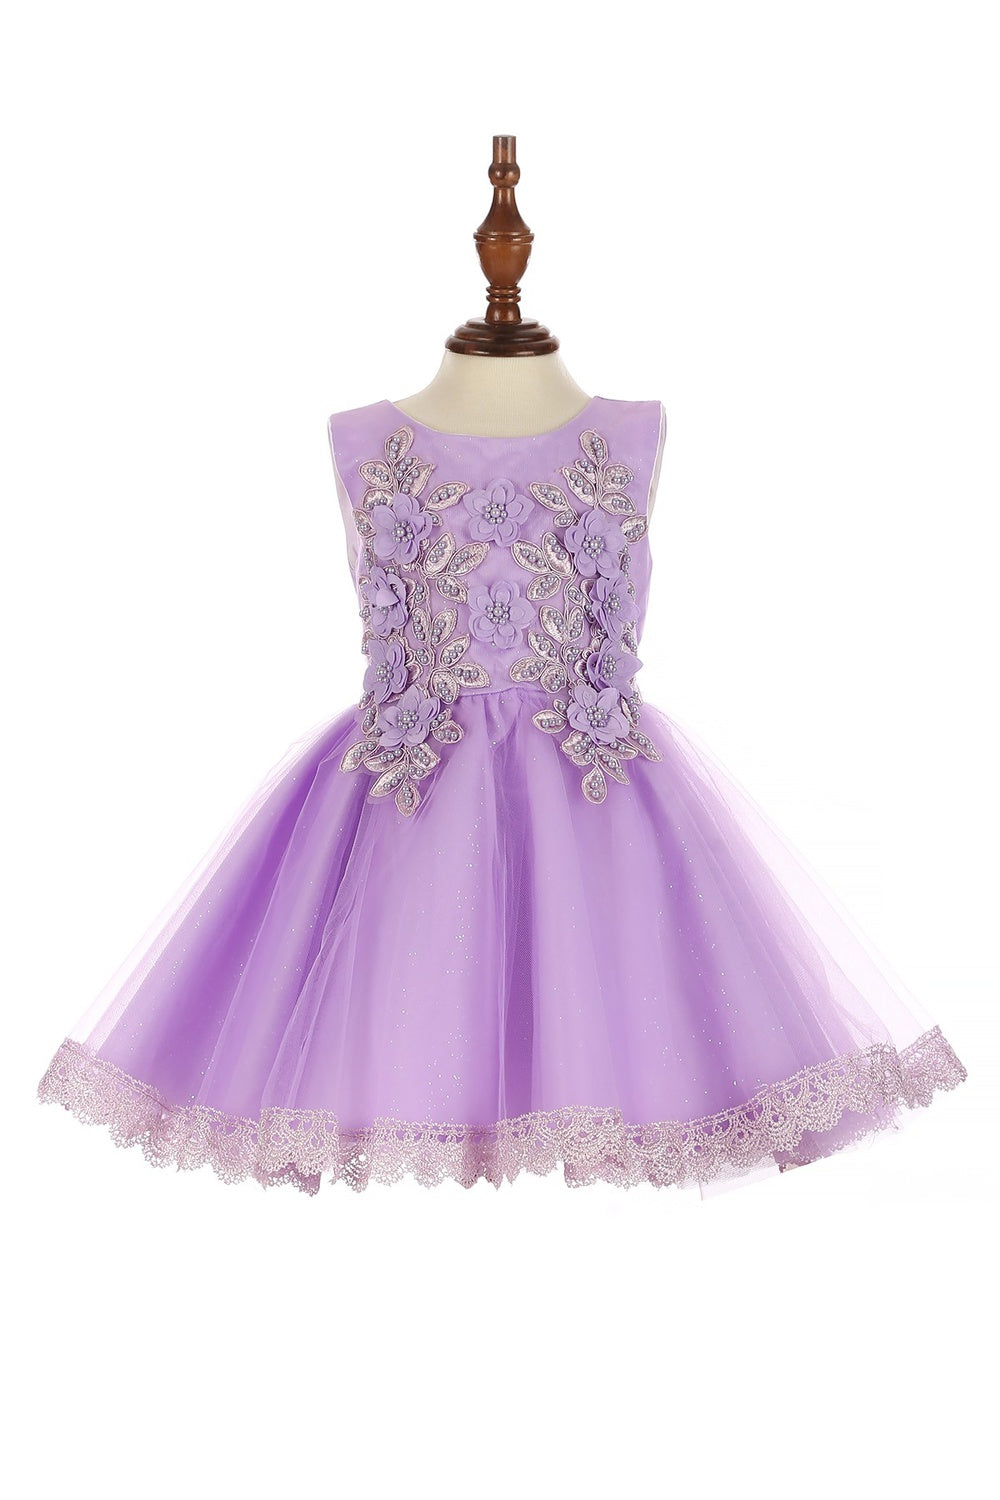 Beautiful Adorned With 3D Flowers Lace Tulle Skirt Kids Dress CU9126B Elsy Style Kids Dress